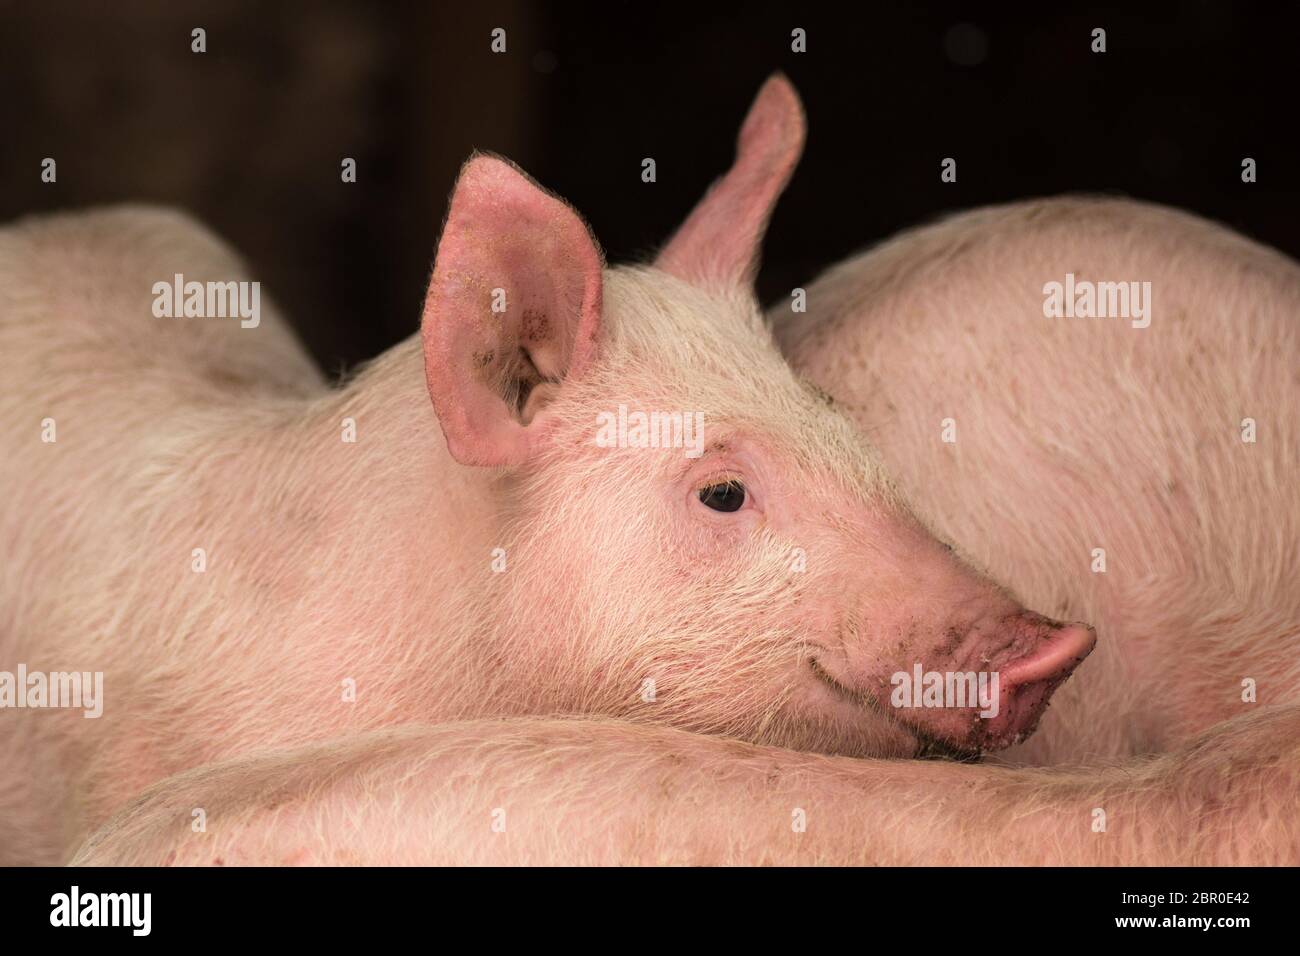 Young pigs in sty, pig breeding swine breeding and livestock farming concept. Stock Photo